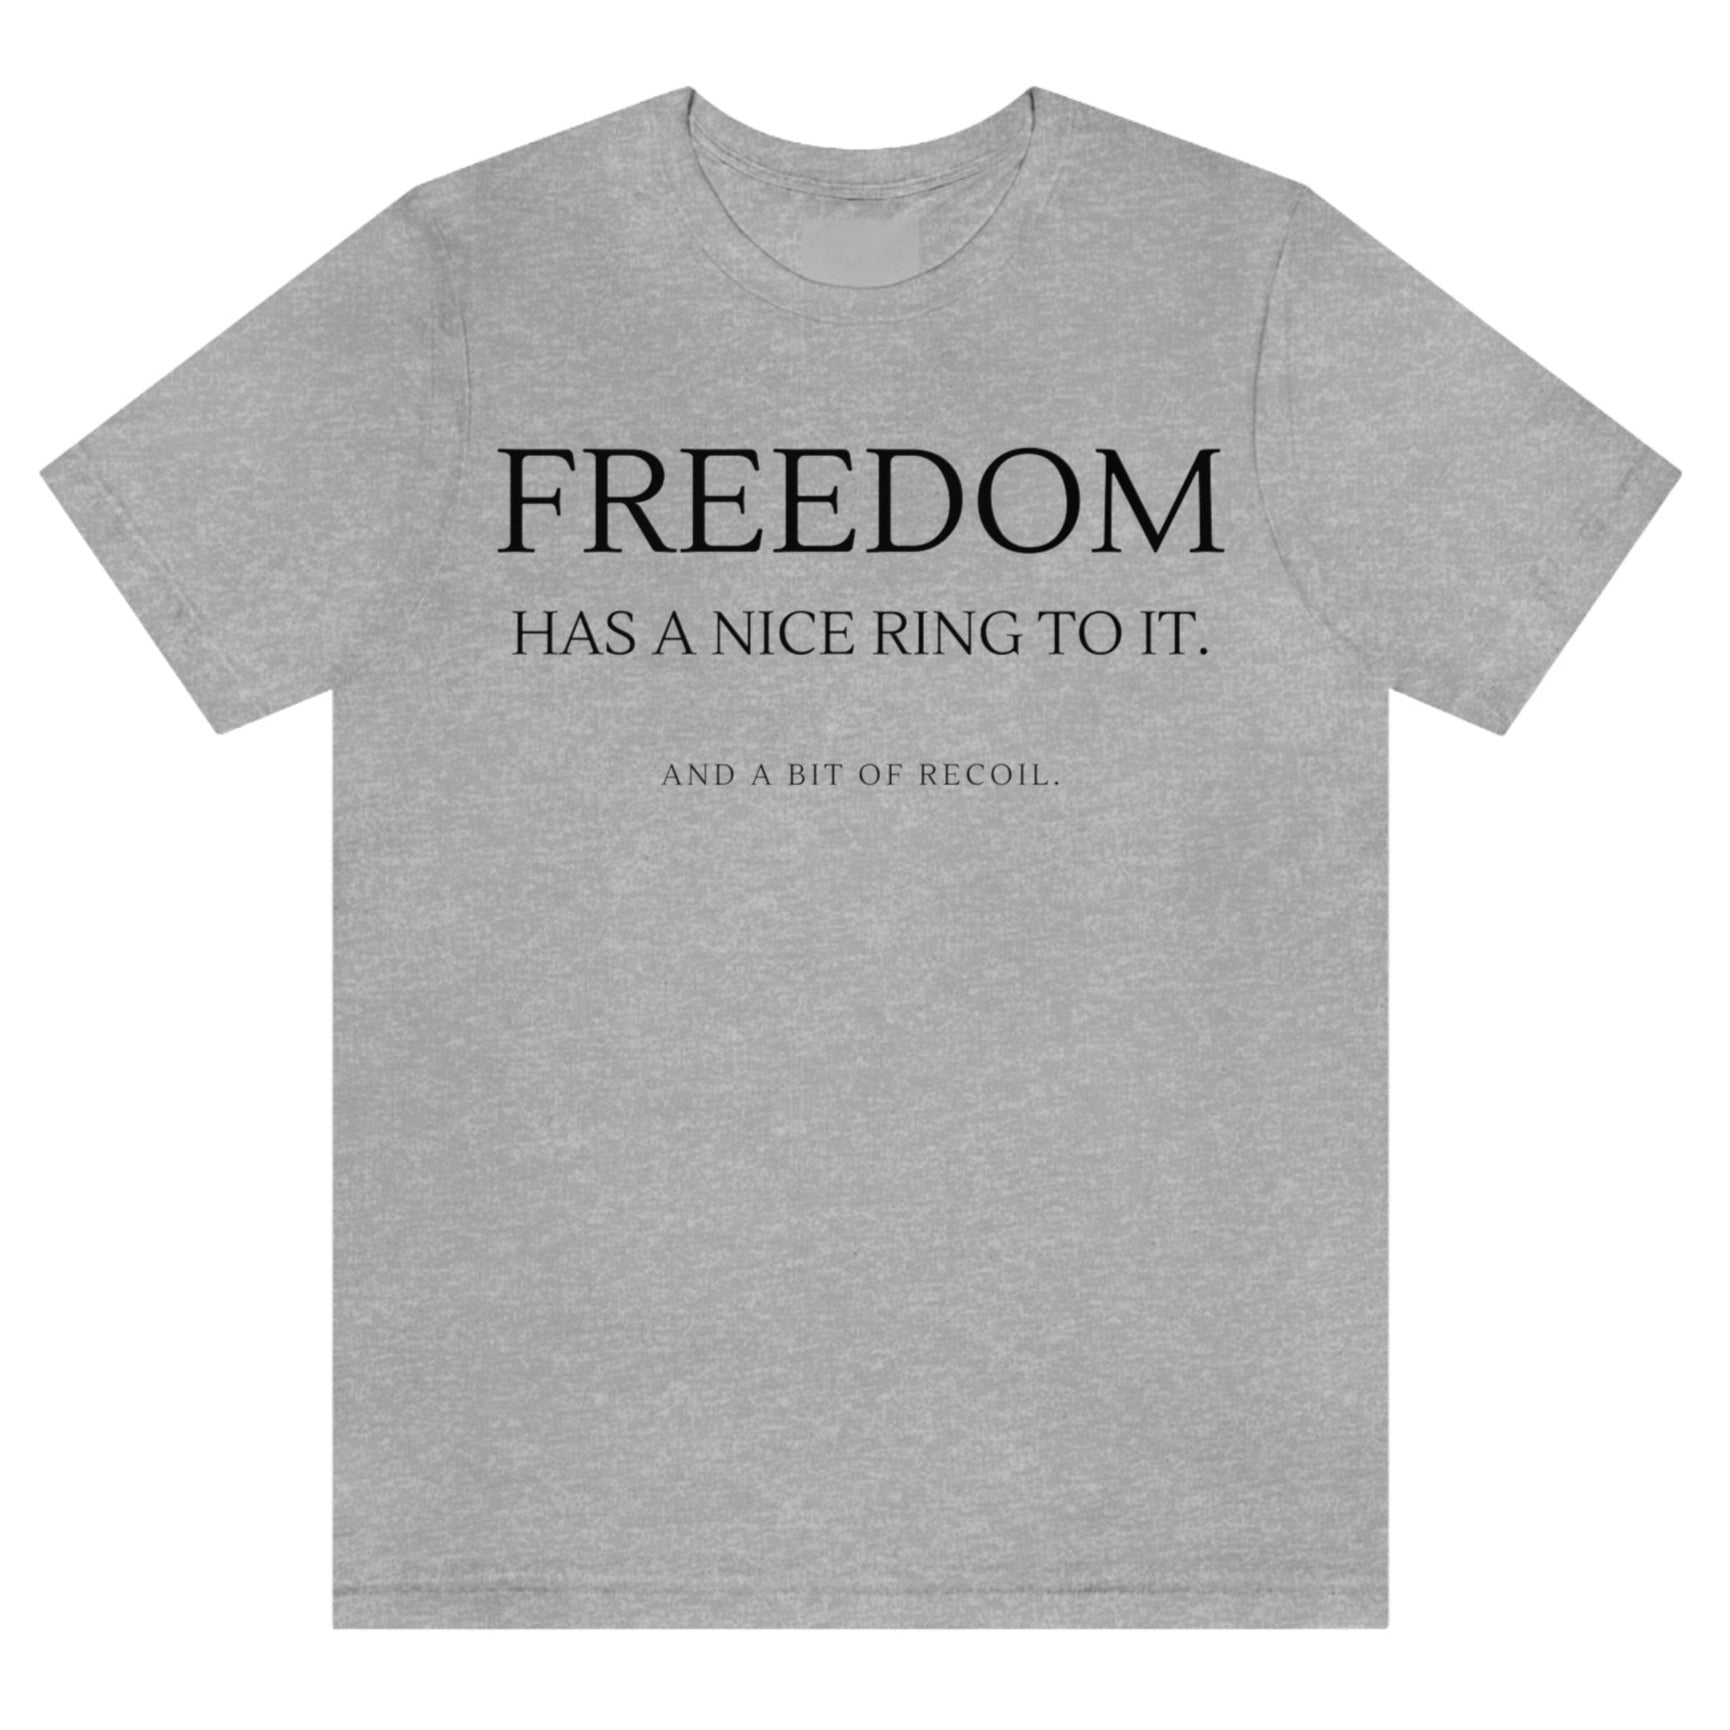 freedom-has-a-nice-ring-to-it-and-a-bit-of-recoil-athletic-heather-grey-t-shirt-2a